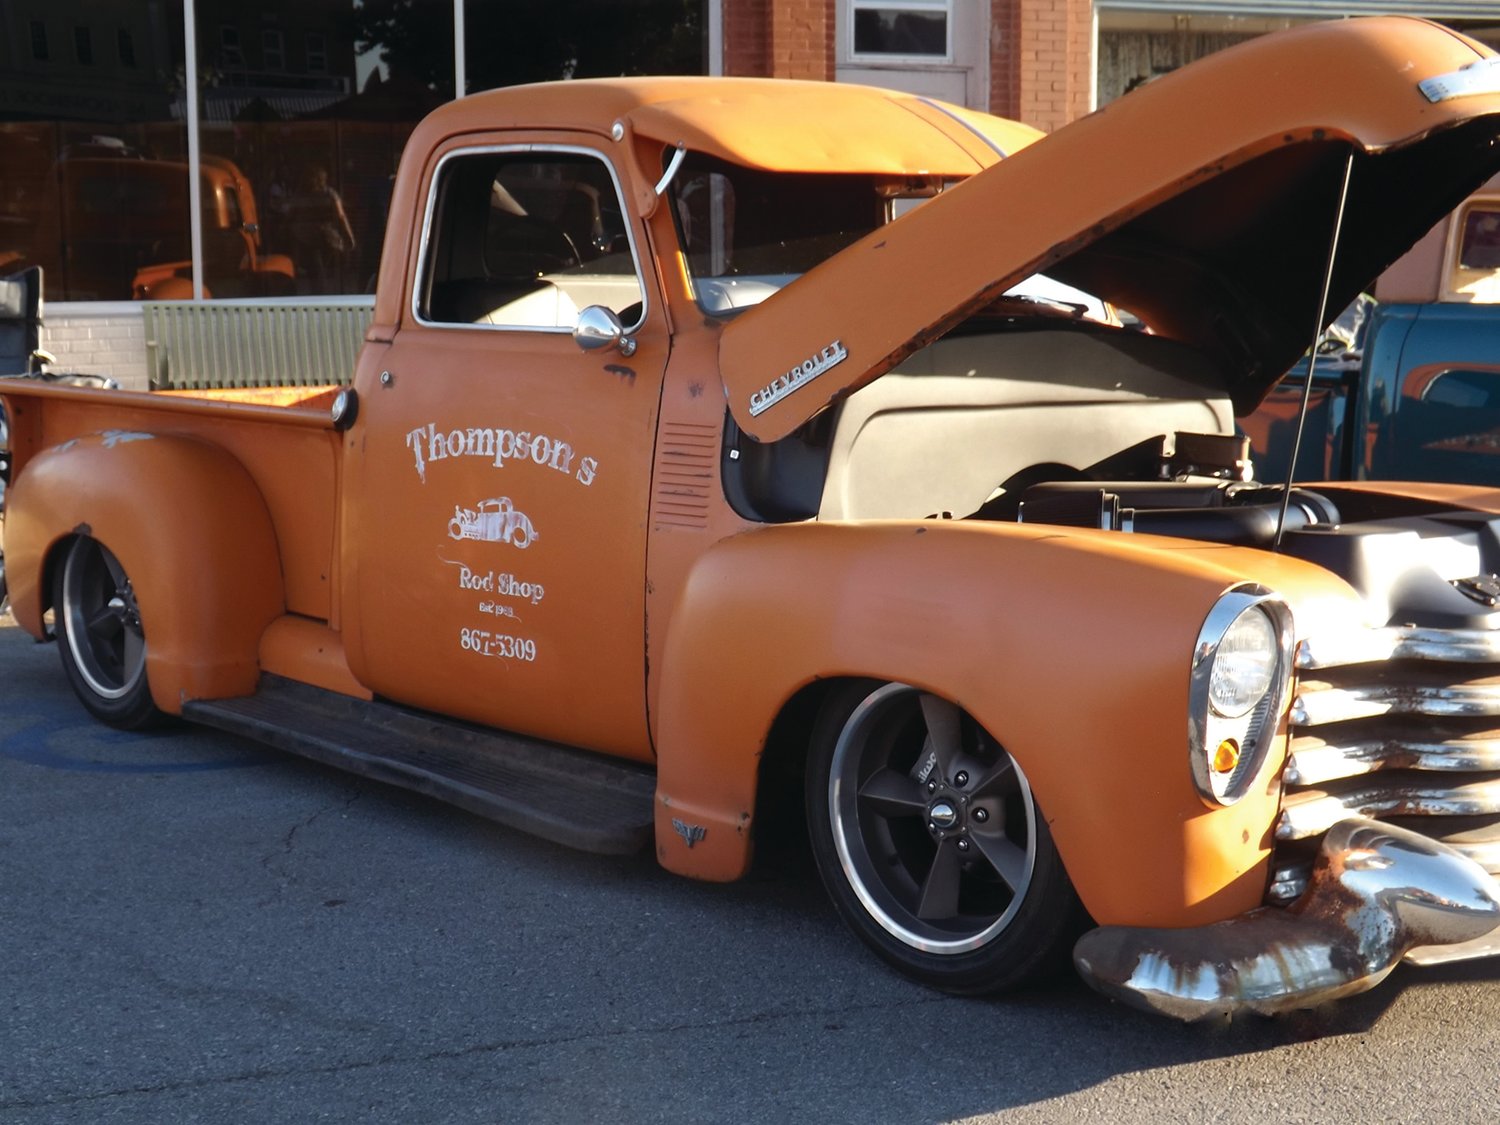 Thompson’s Rod Shop Chevy was an award winner at the Car Show.